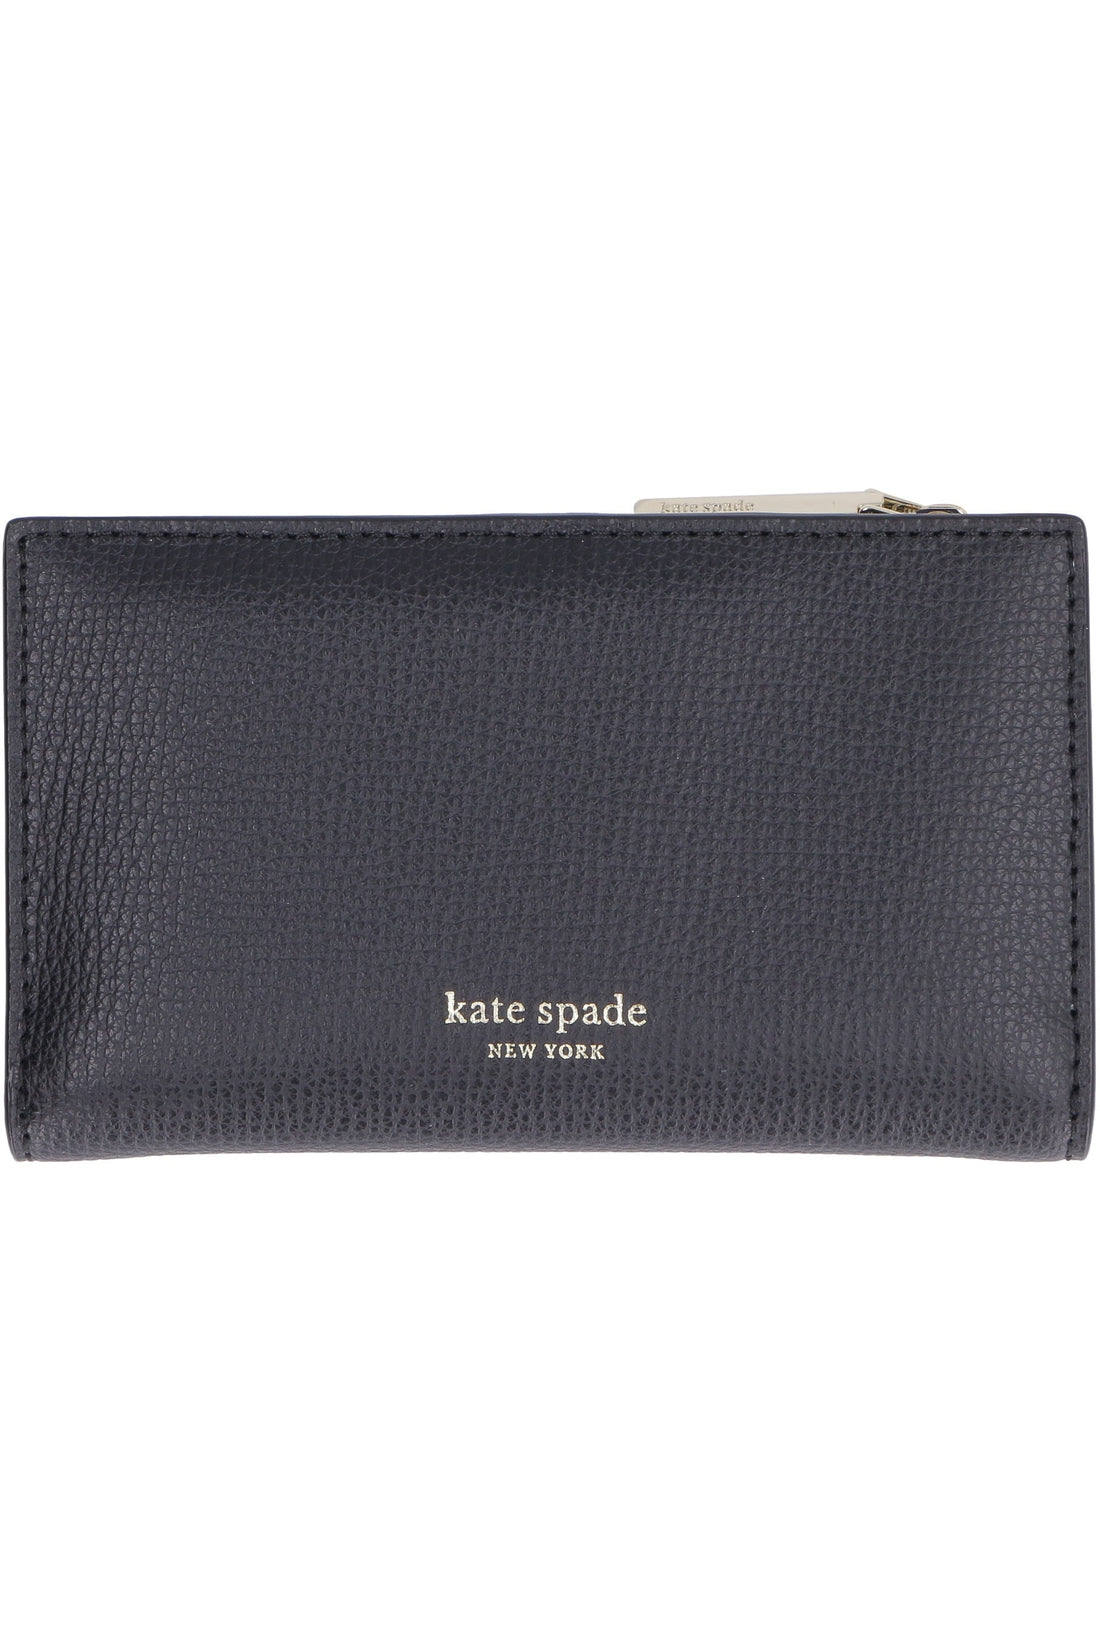 Kate Spade New York-OUTLET-SALE-Leather wallet-ARCHIVIST